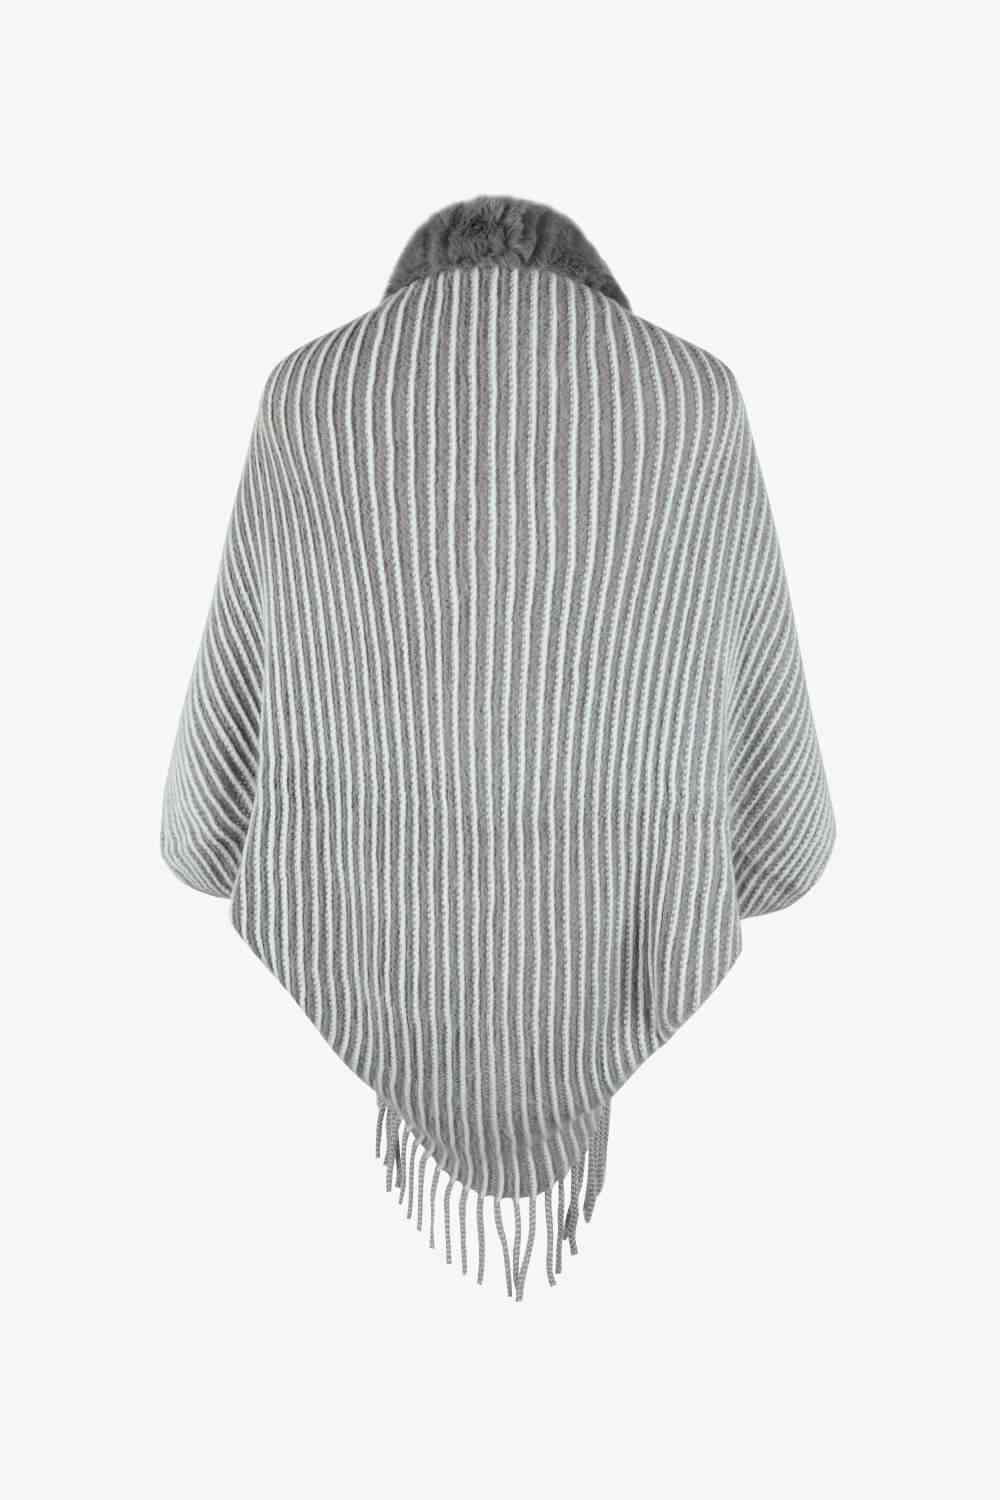 Striped Open Front Fringe Poncho